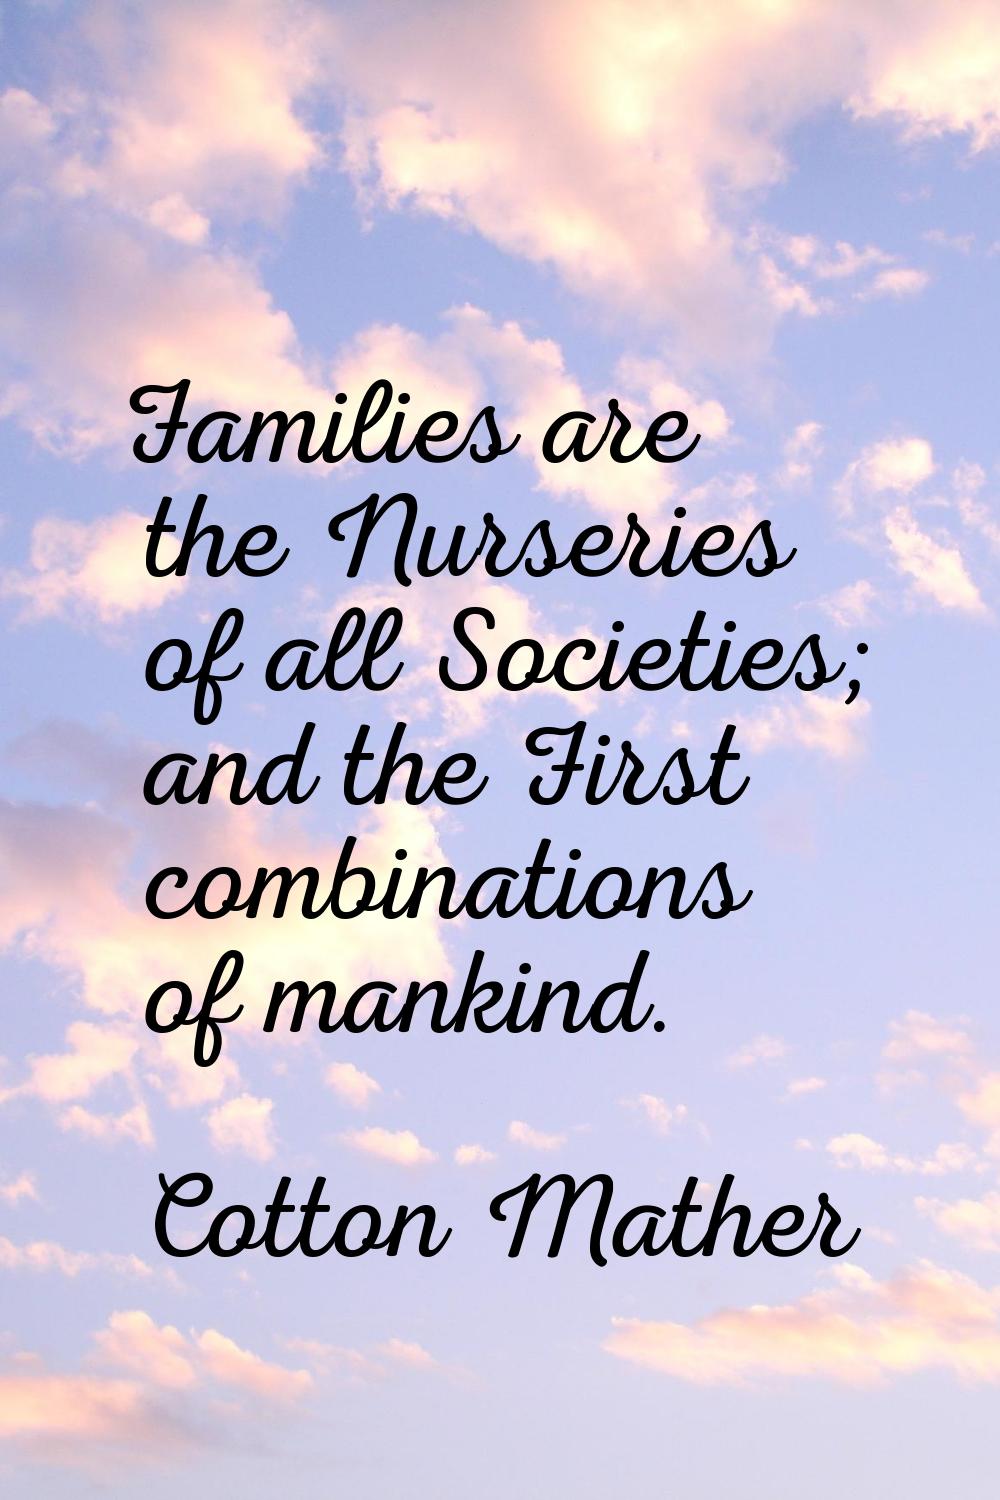 Families are the Nurseries of all Societies; and the First combinations of mankind.